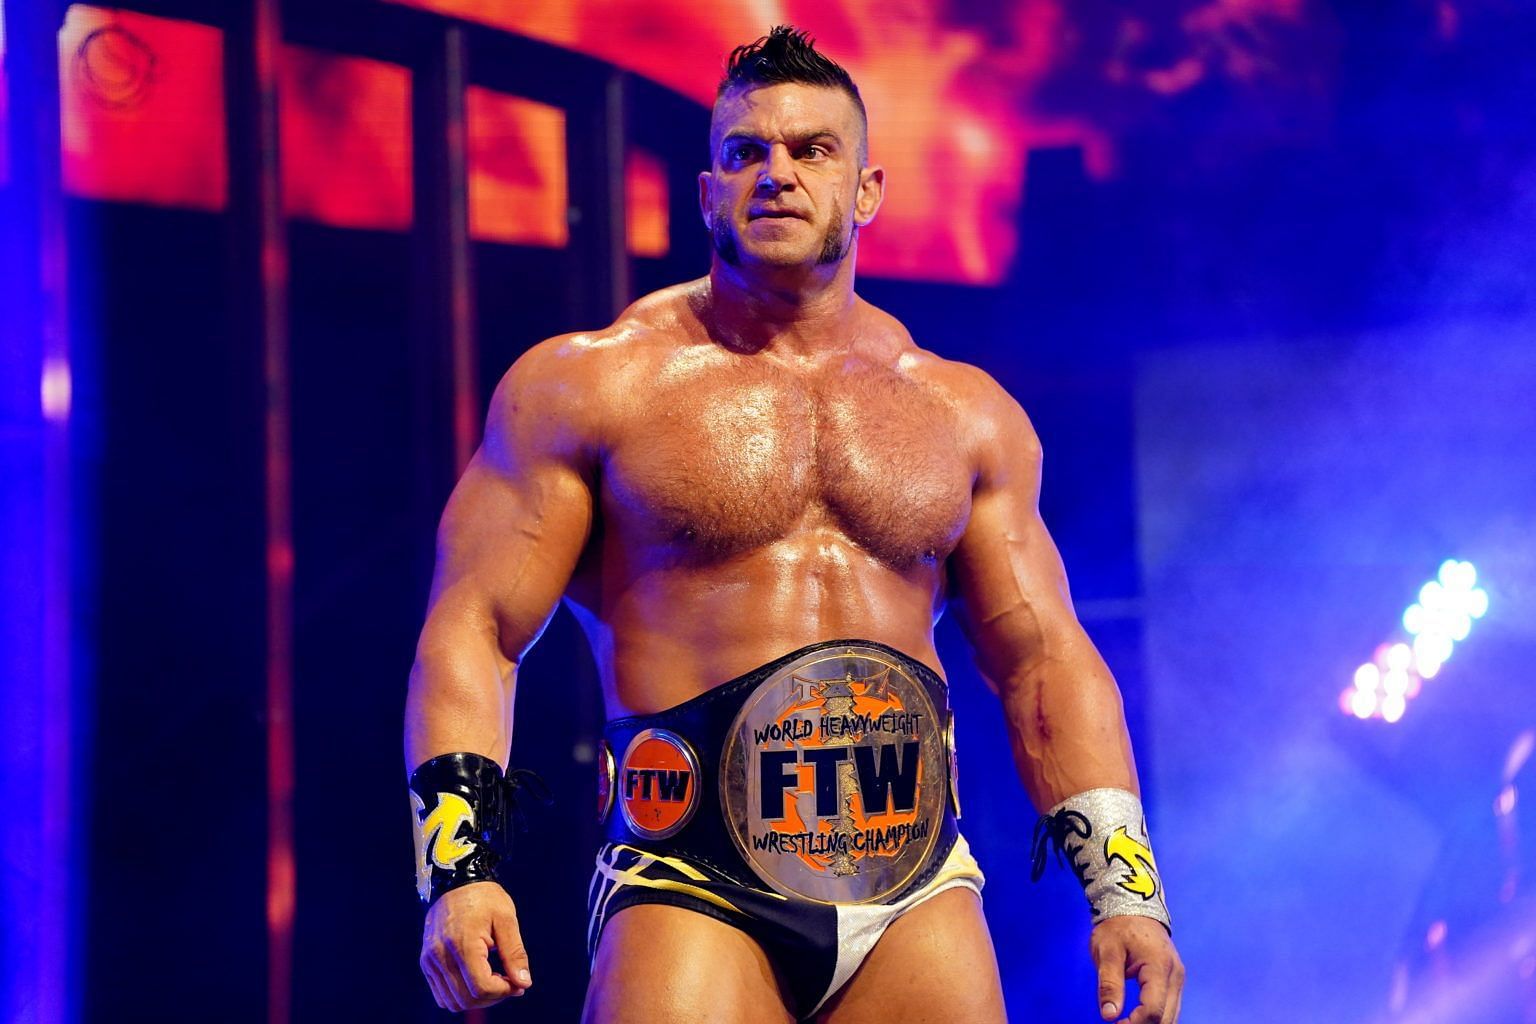 Brian Cage performing for AEW as FTW champion